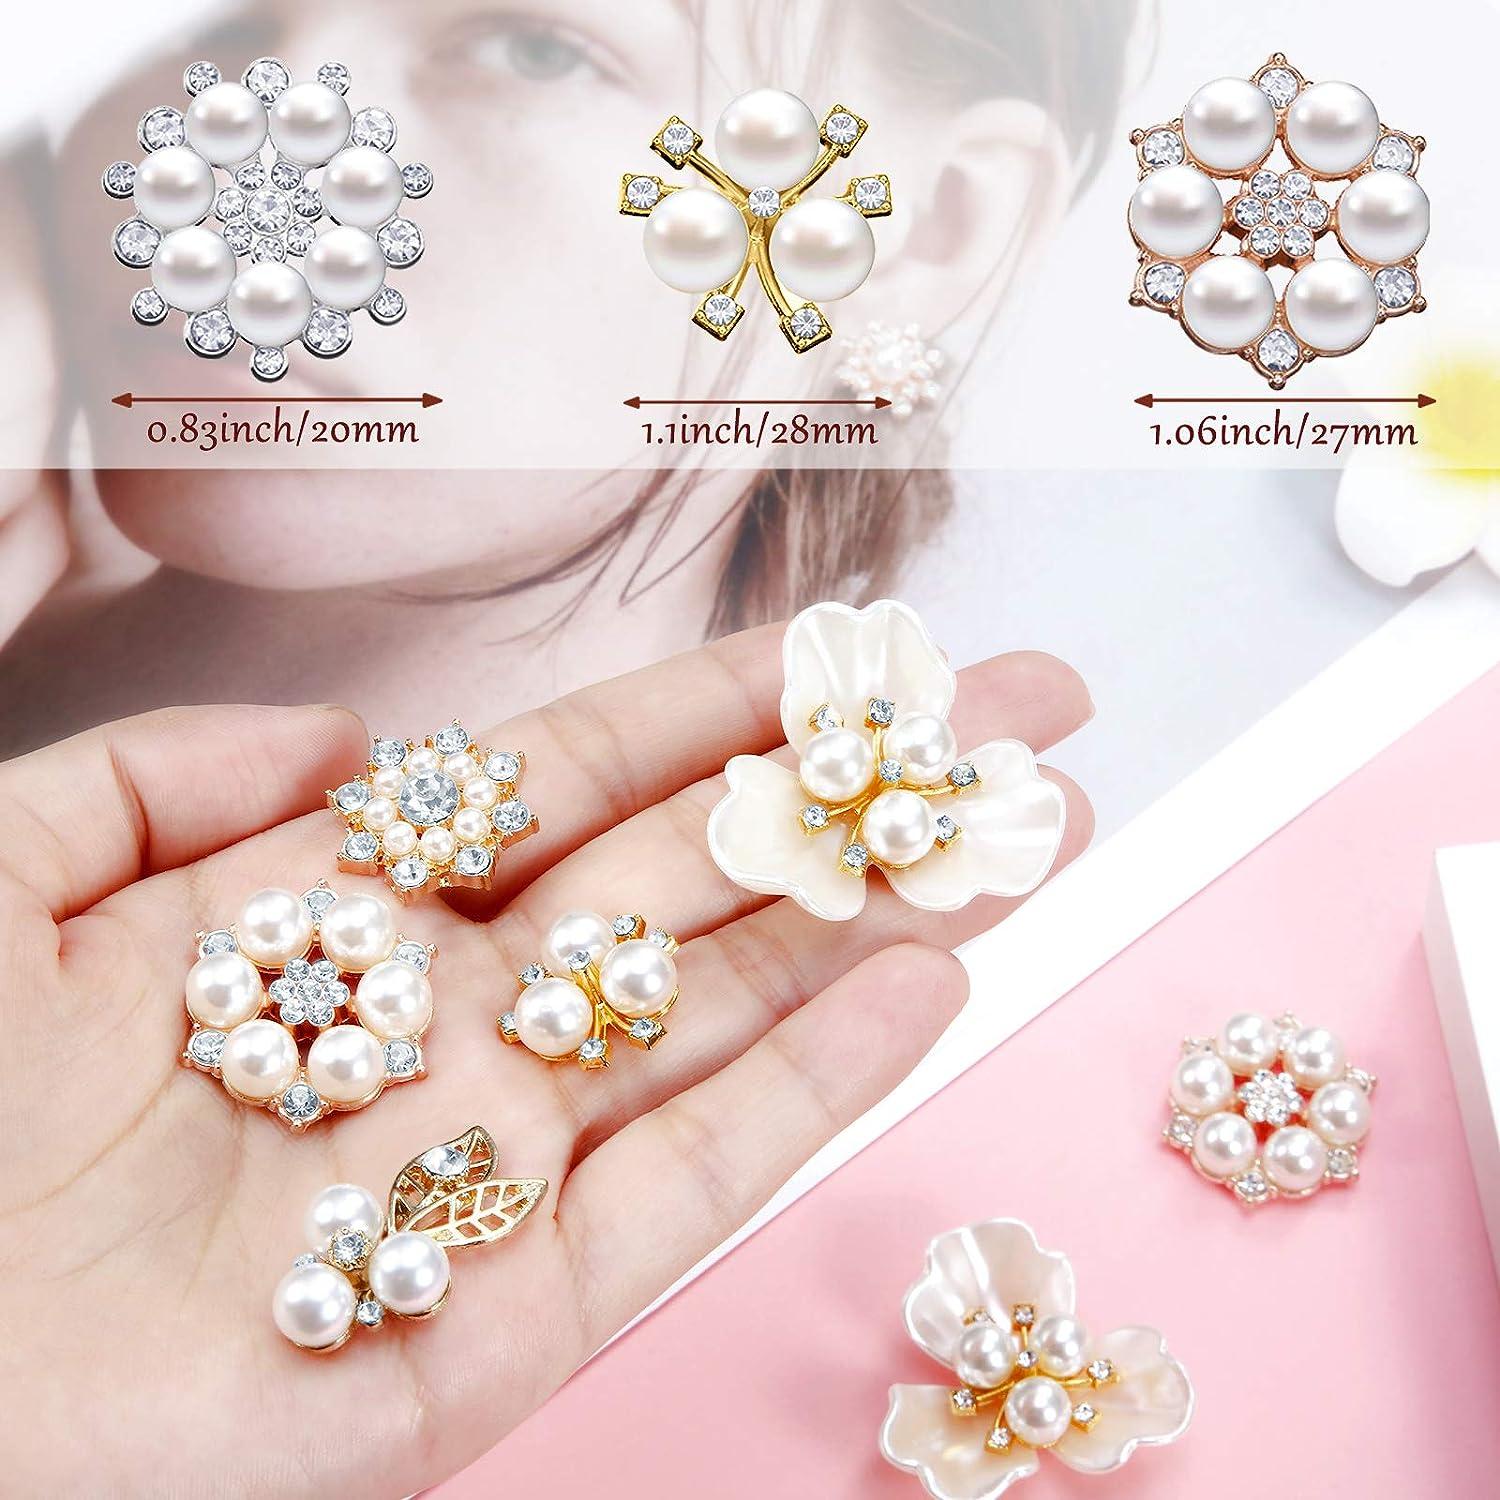 Rhinestone Pearl Button Embellishments for Crafts Projects